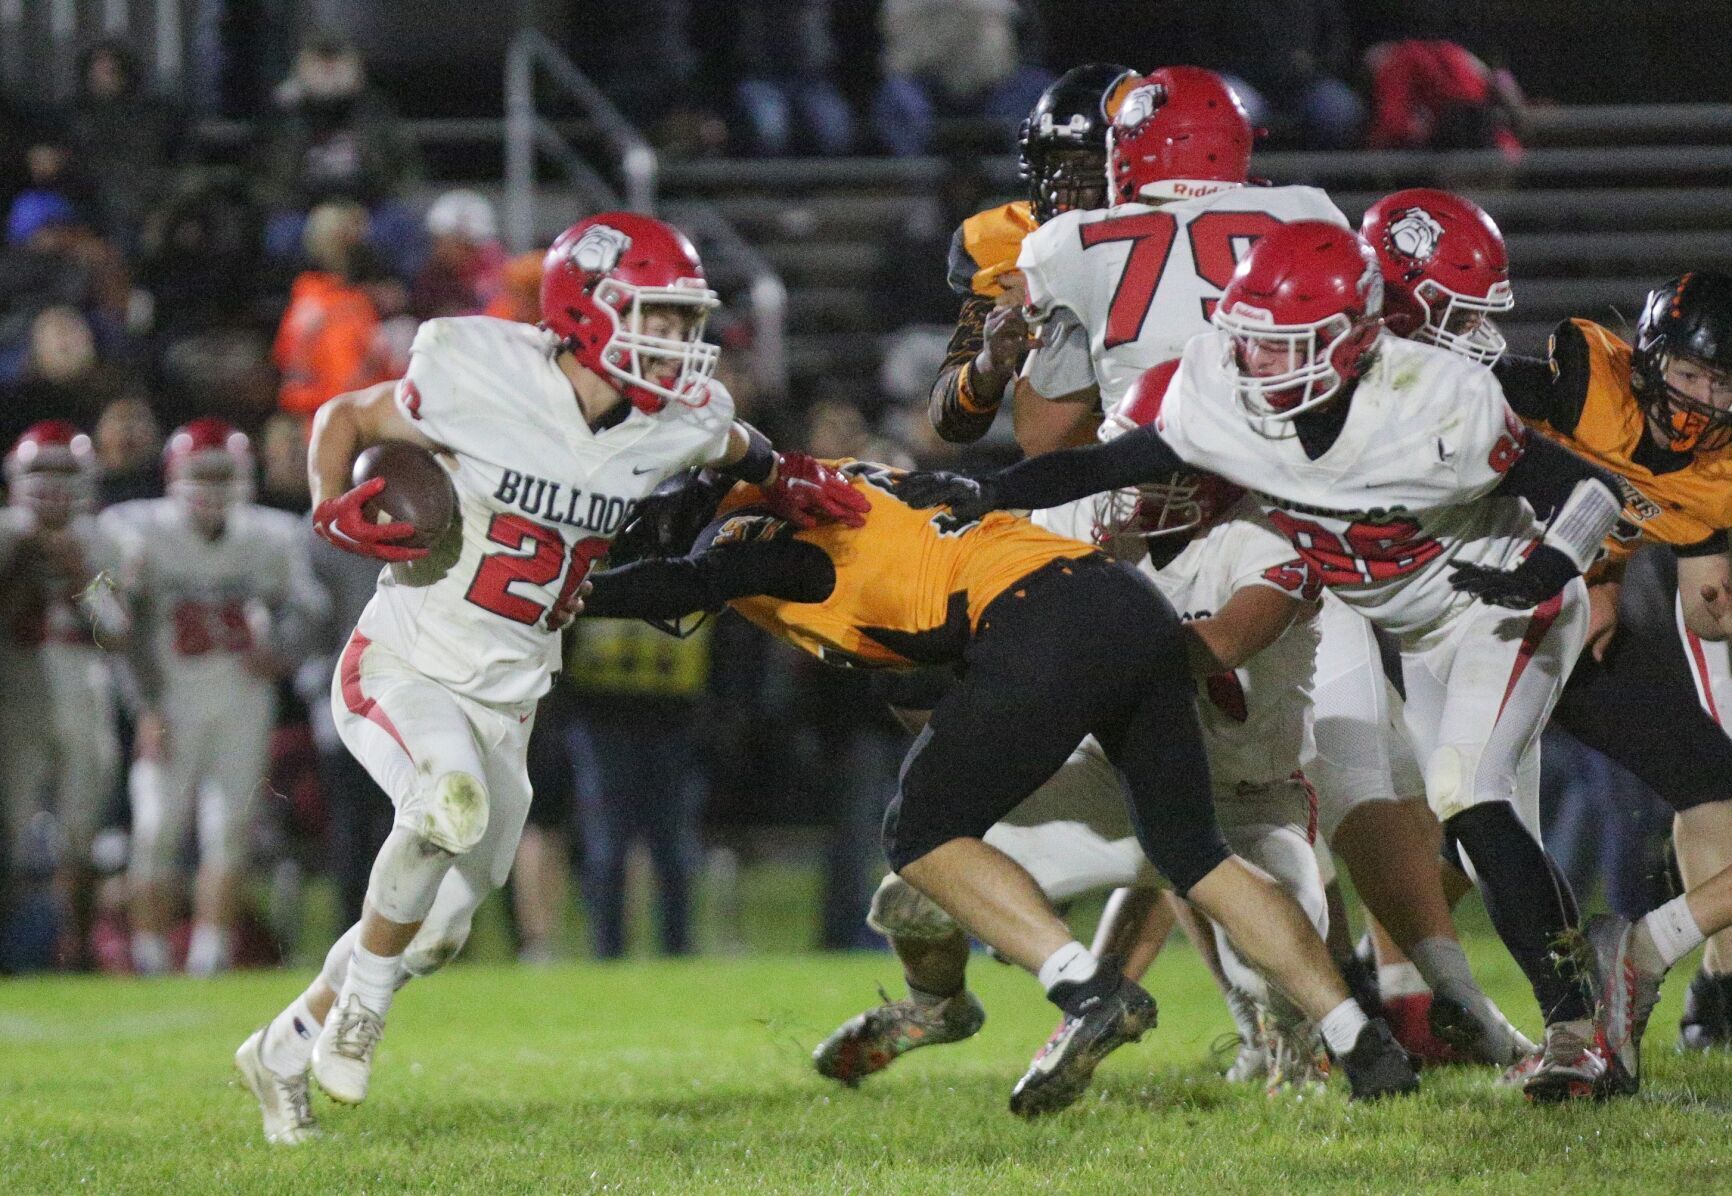 Preview of Week 2 high school football games in North Iowa